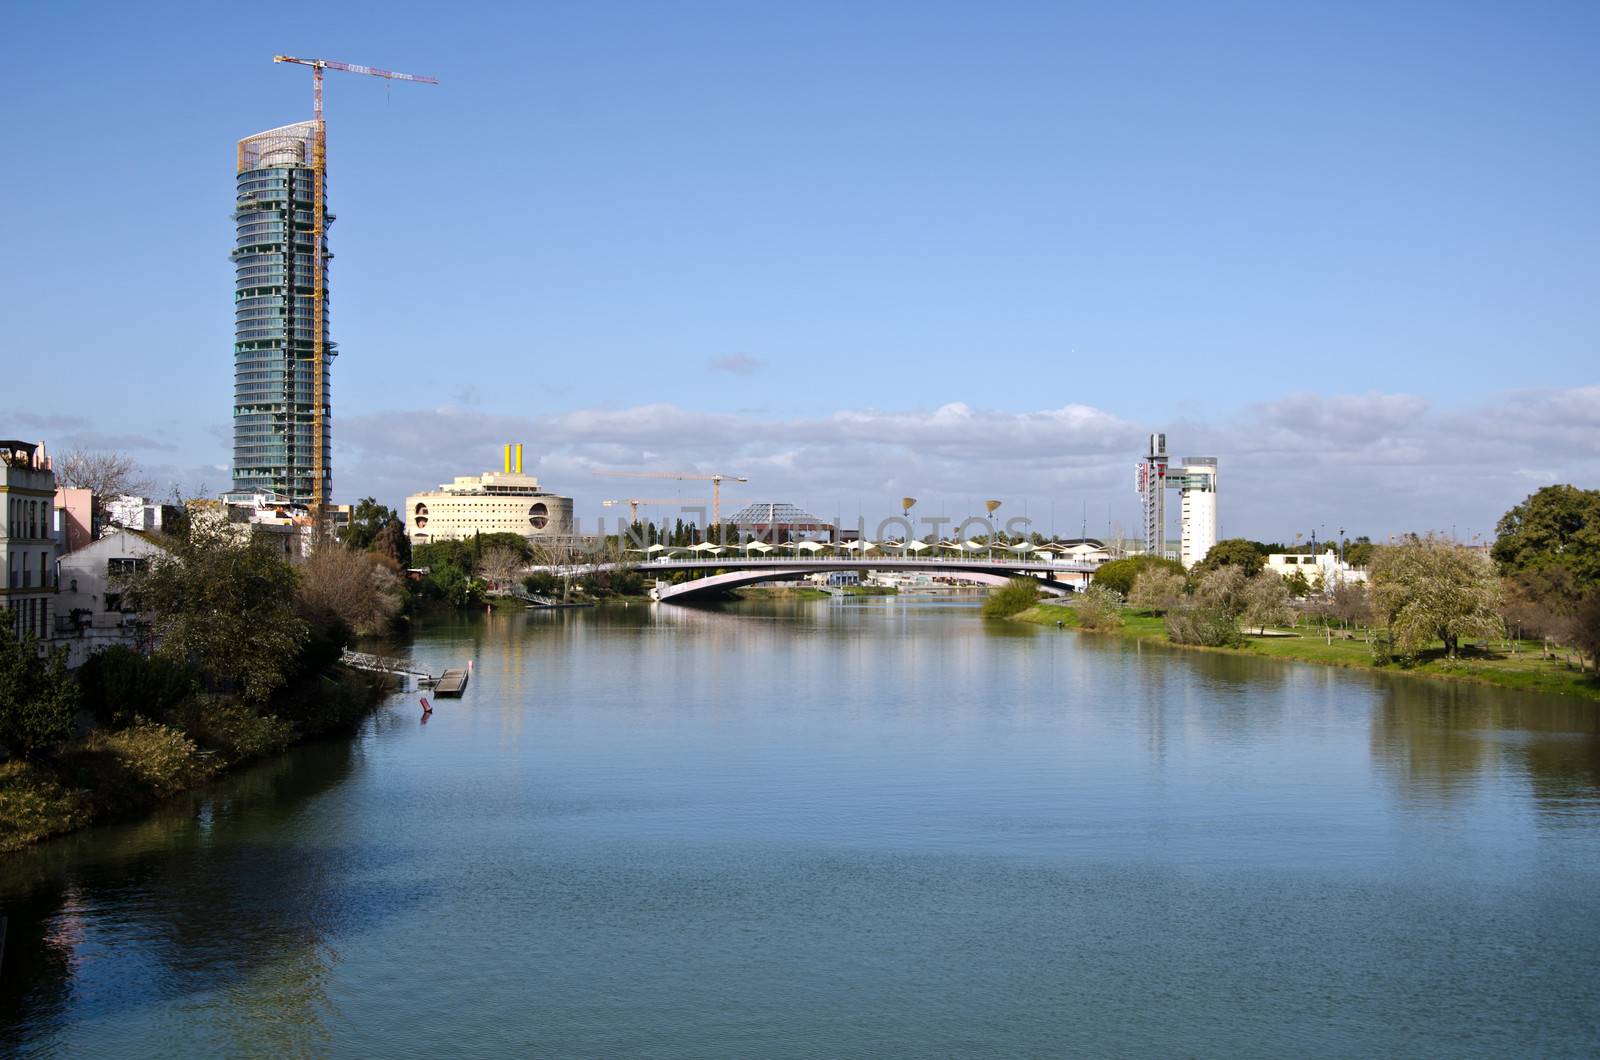 Guadalquivir River in Seville by lauria